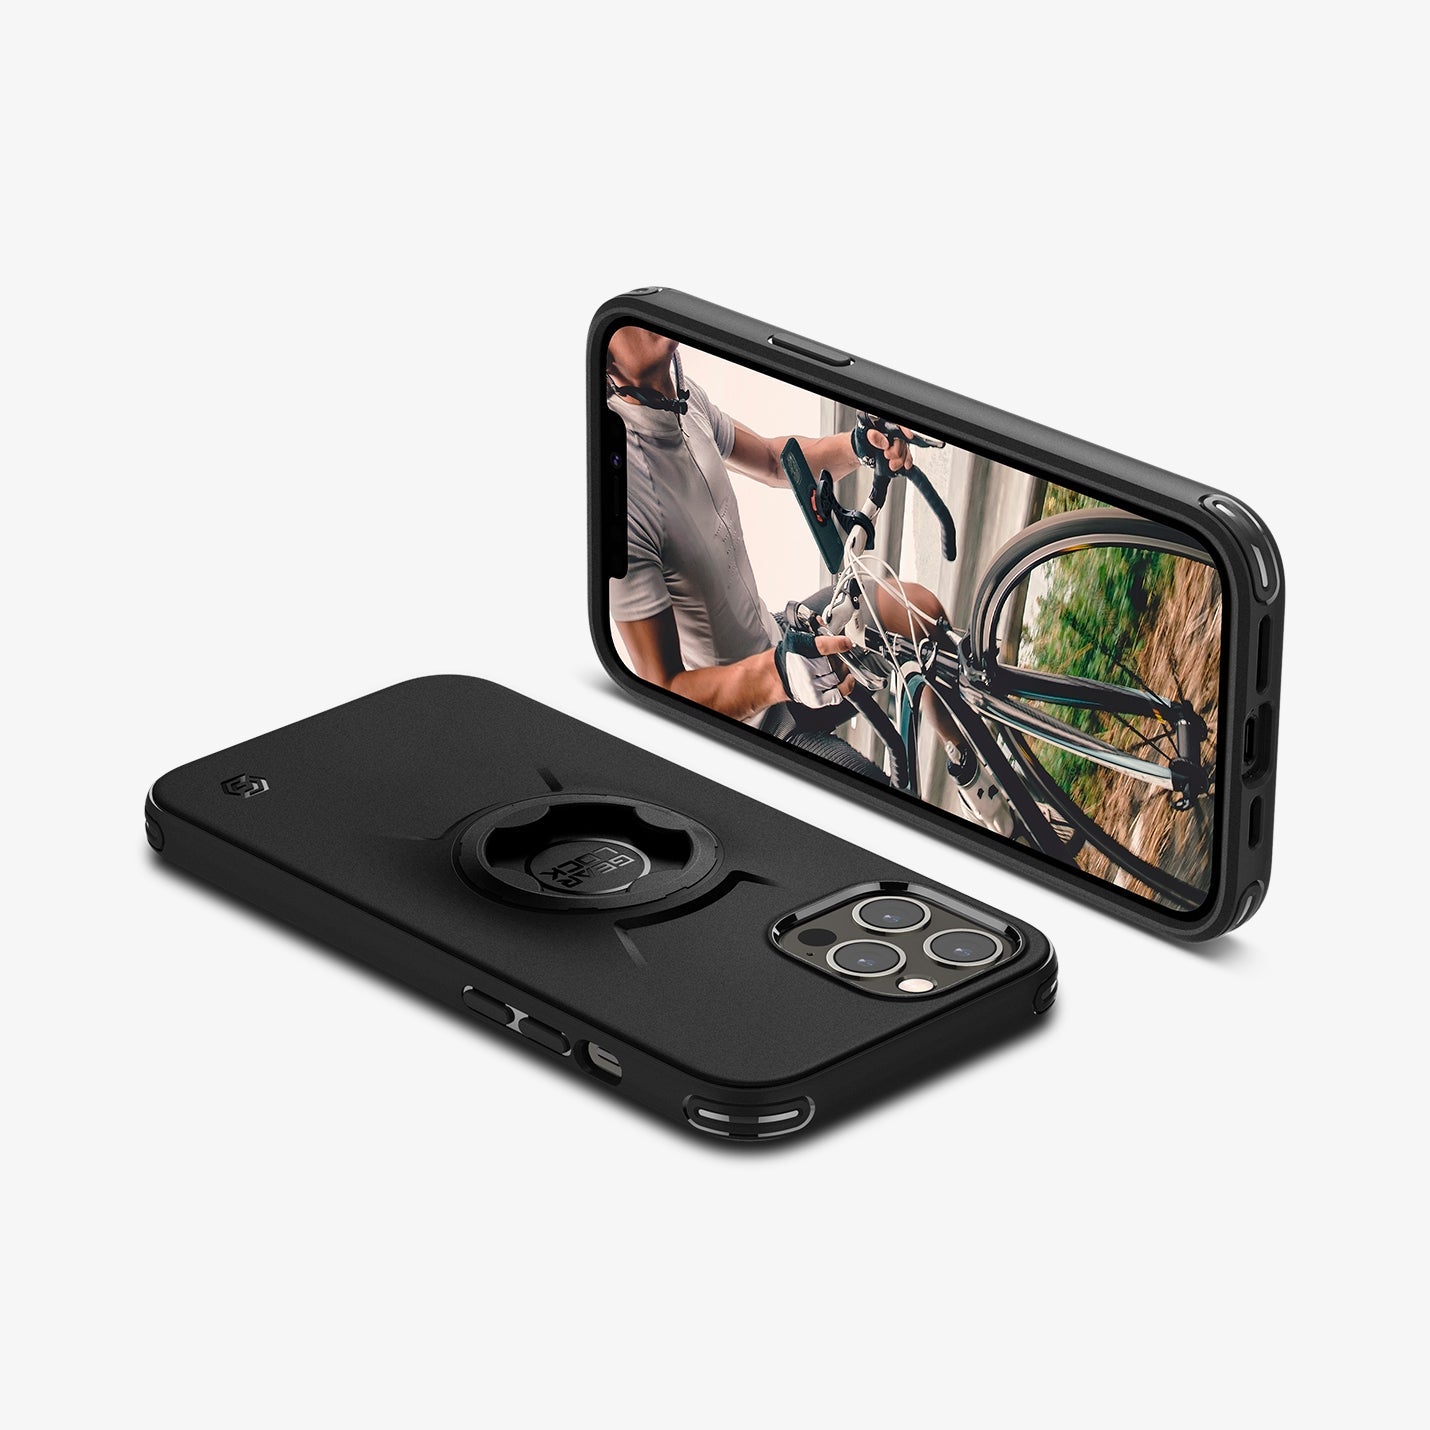 ACS01587 - Black Gearlock iPhone 12 Pro Max Bike Mount Case showing the back, front, bottom, top and side